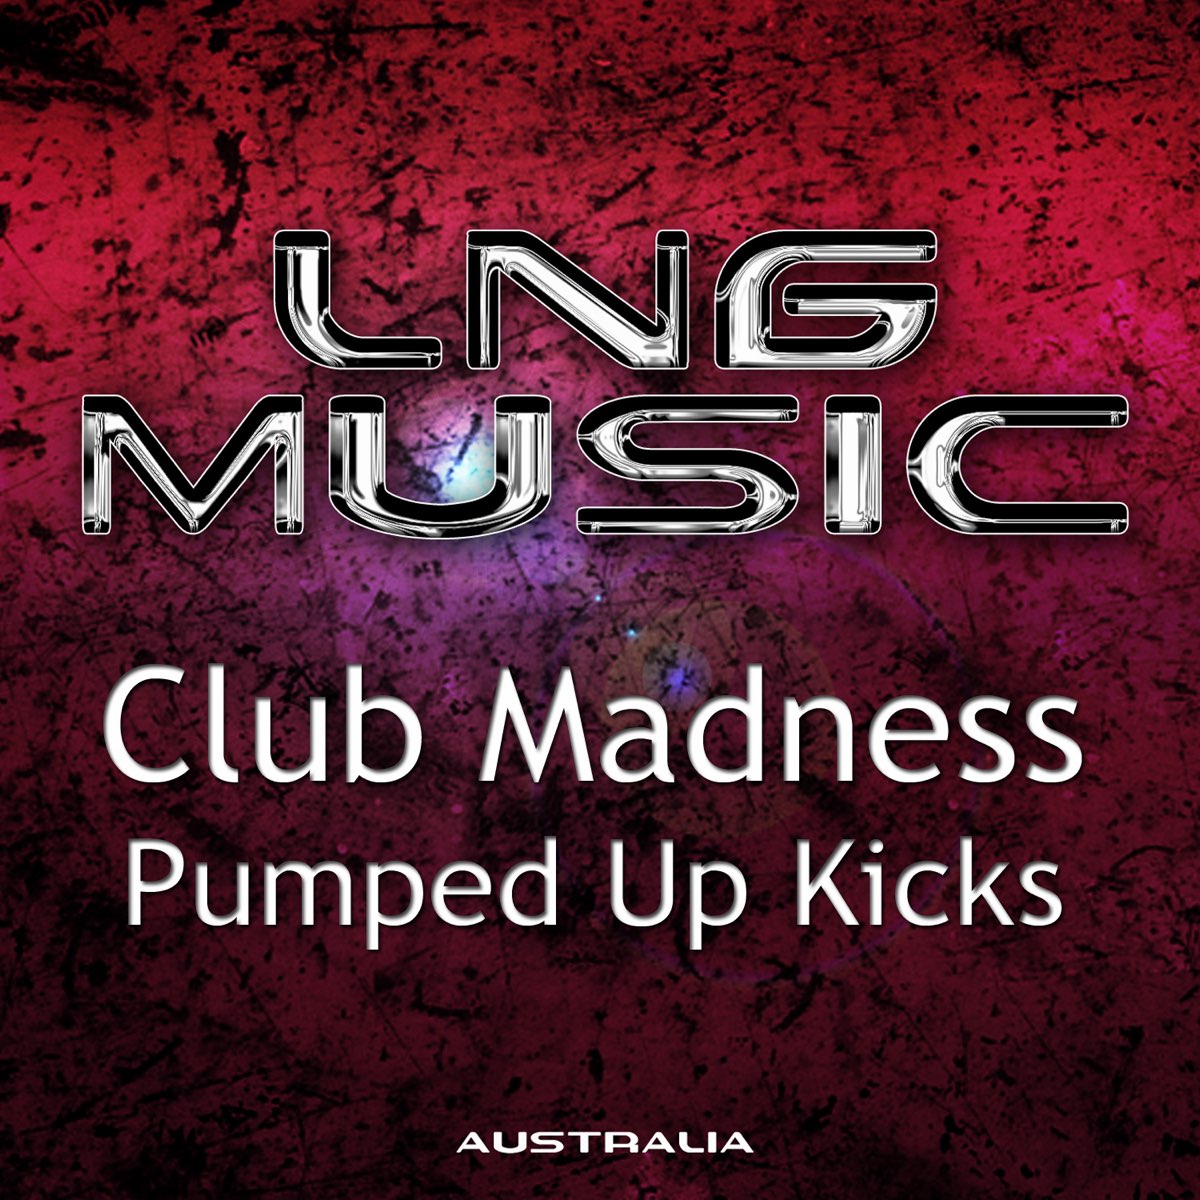 Pumped Up Kicks (Remixes) by Club Madness on Apple Music